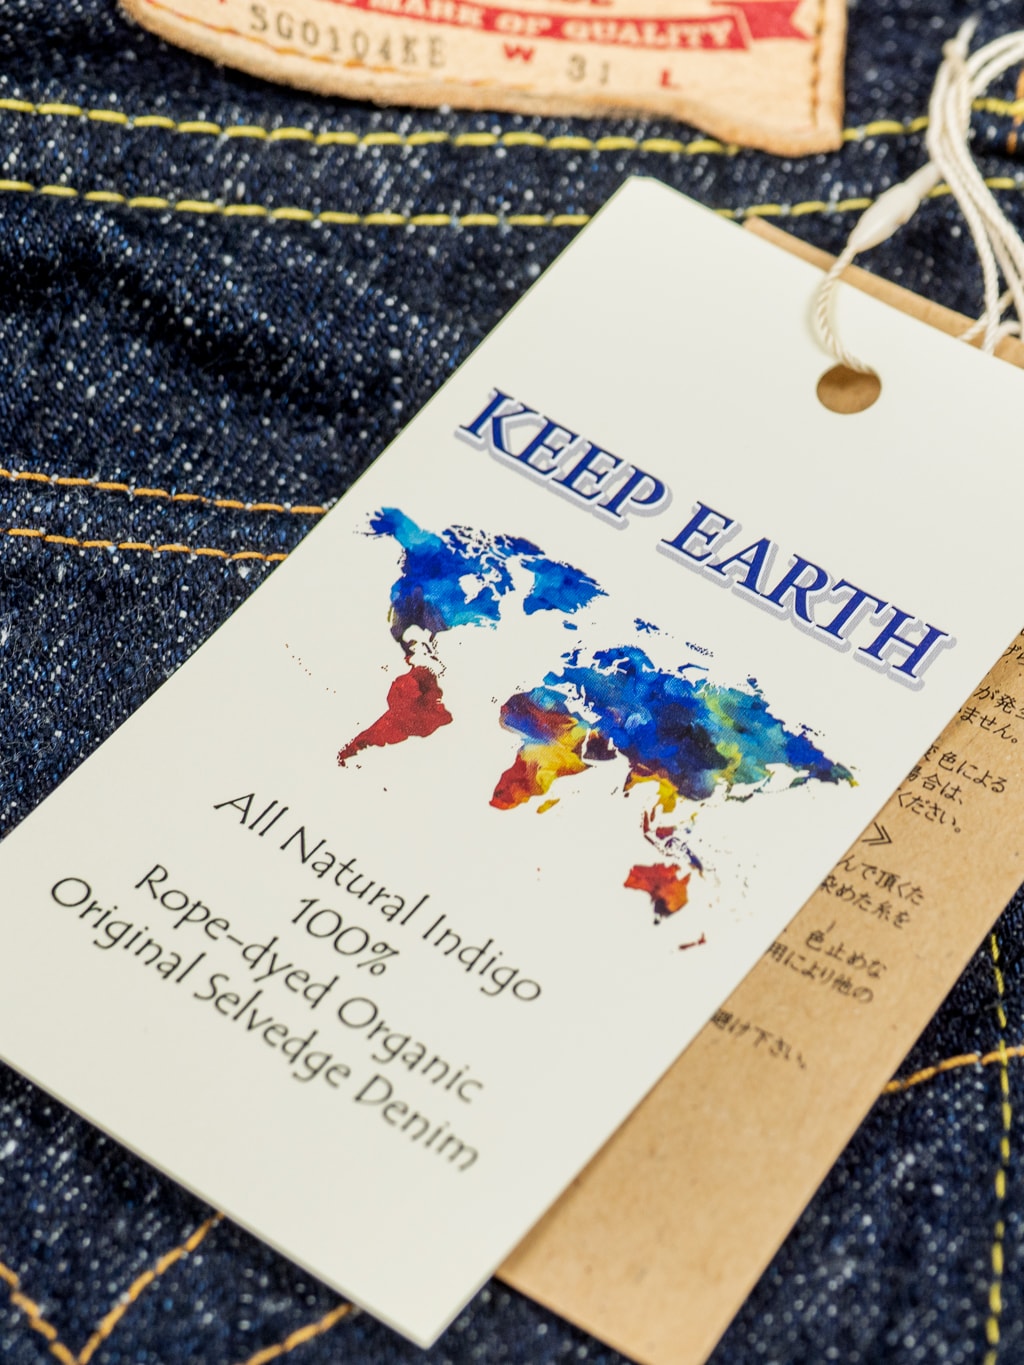 The Strike Gold Keep Earth Natural Indigo Jeans label